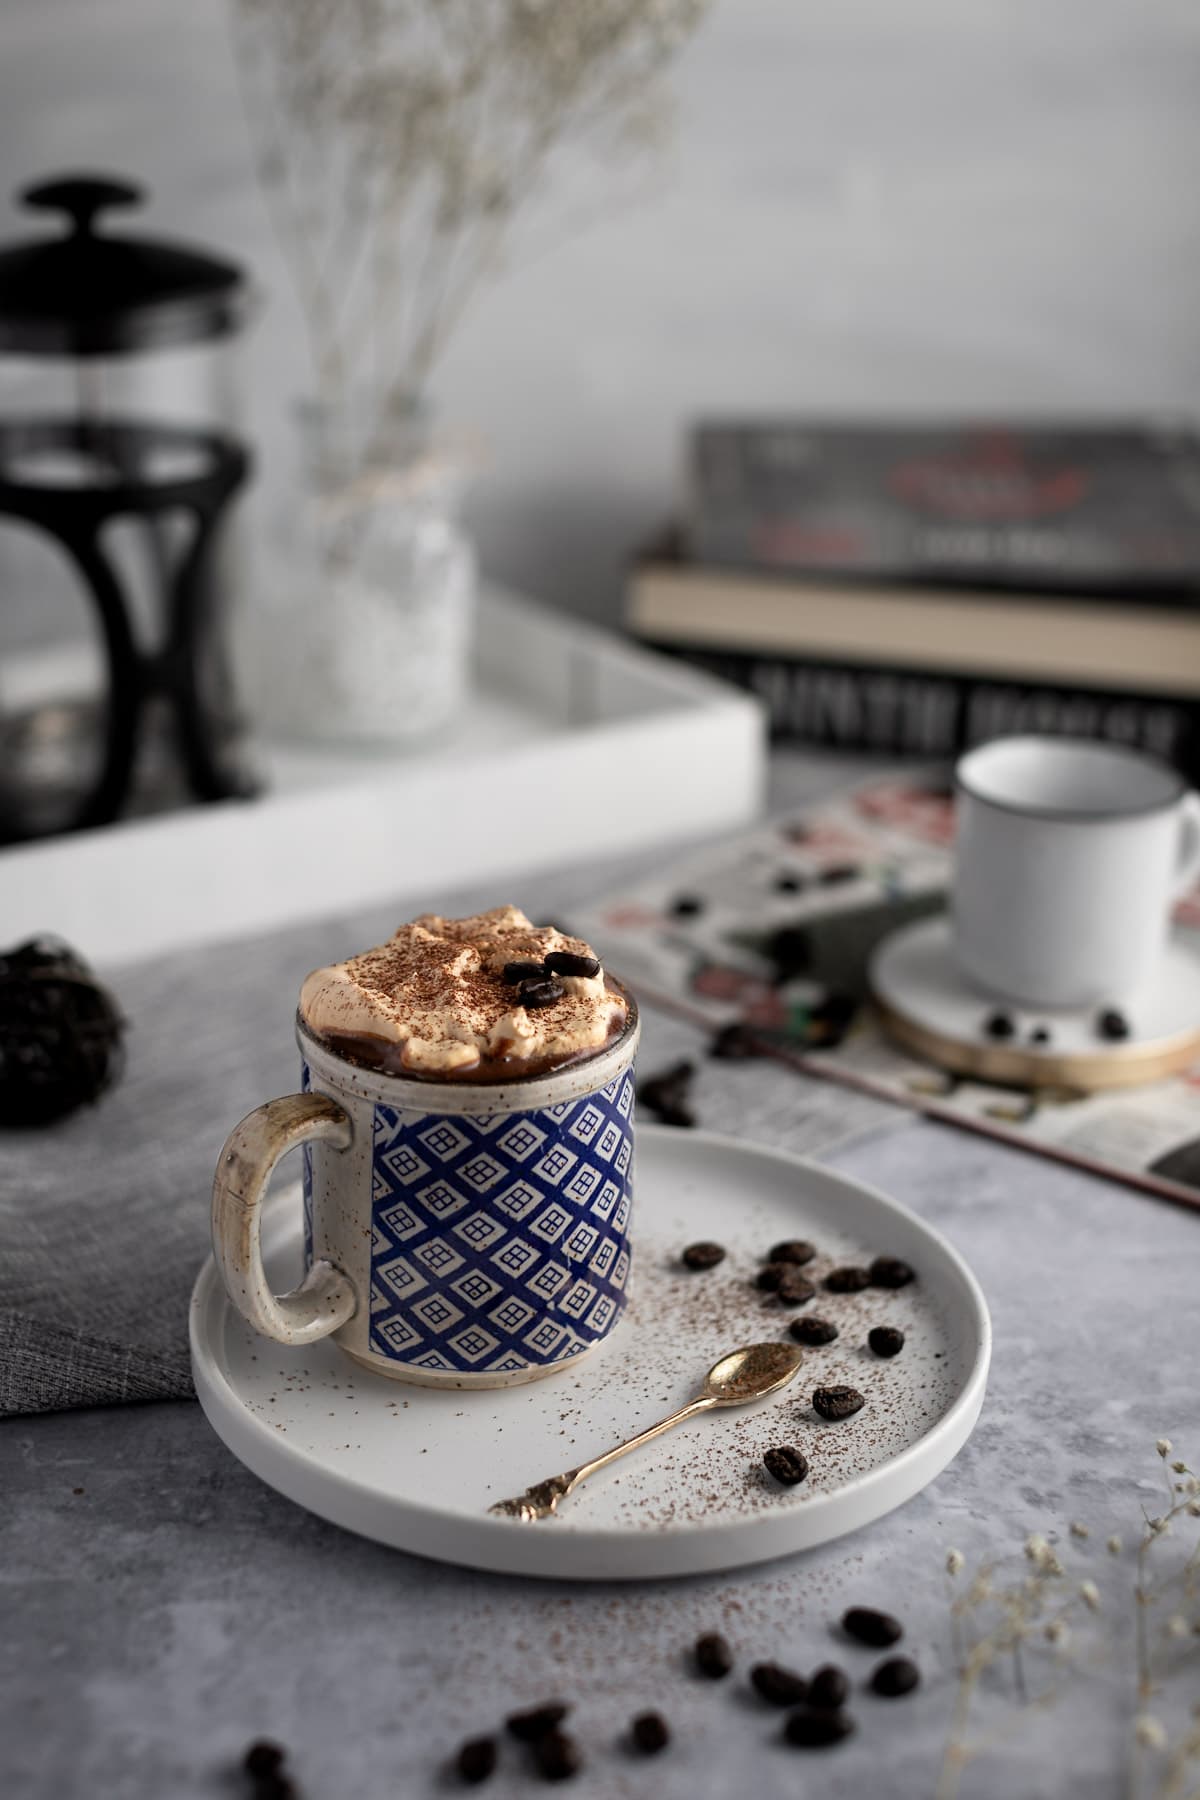 Caffeinated hot chocolate topped with coffee whipped cream in a blue and gray geometric patterned mug, on a white plate with books in the background.